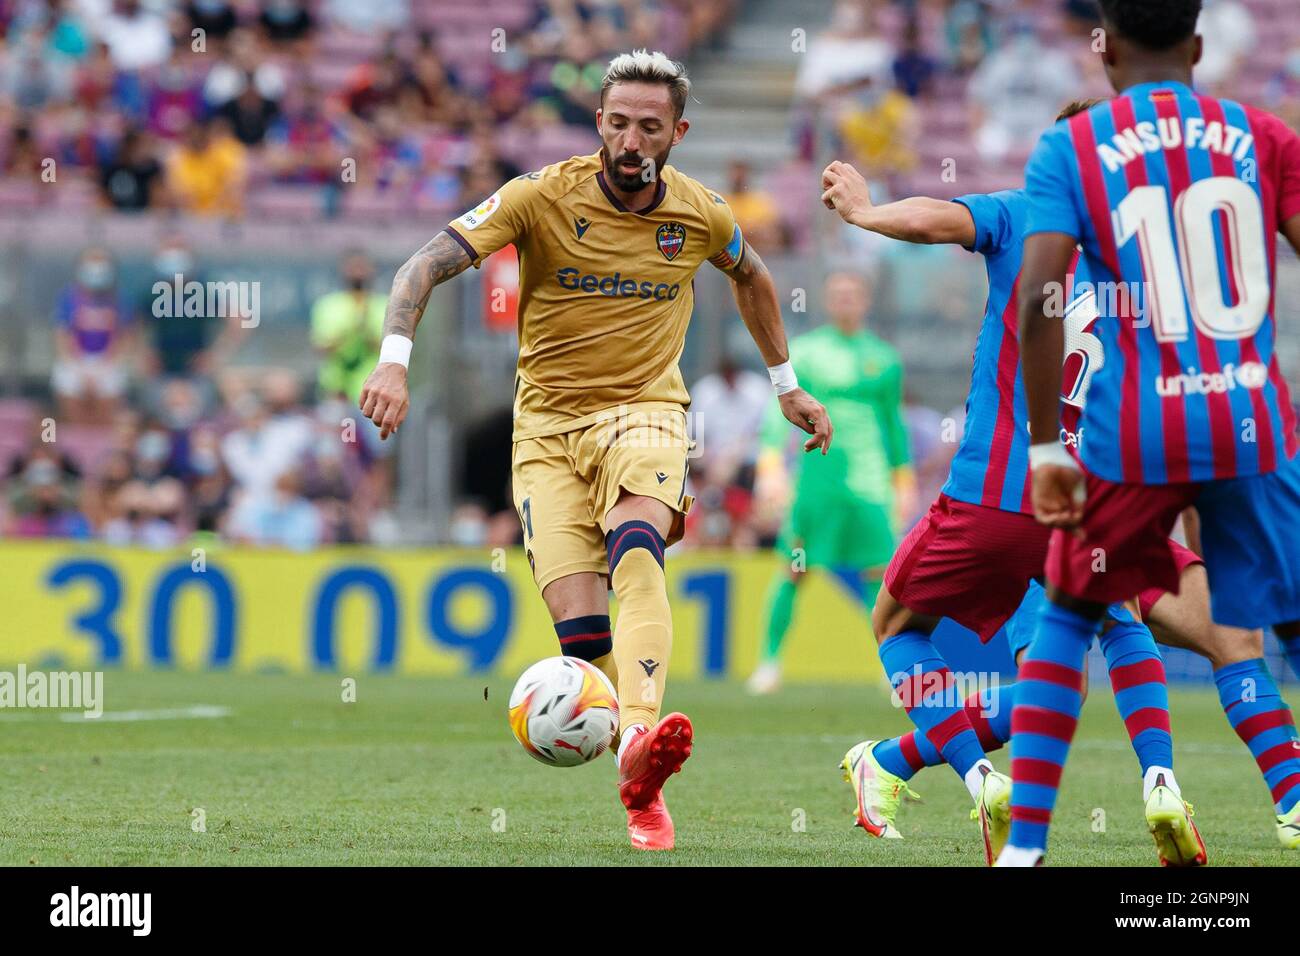 Jose Luis Morales of Levante UD in action during the LaLiga match between FC  Barcelona and Levante UD at Camp Nou.Final score; FC Barcelona 3:0 Levante  UD. (Photo by Thiago Prudencio /